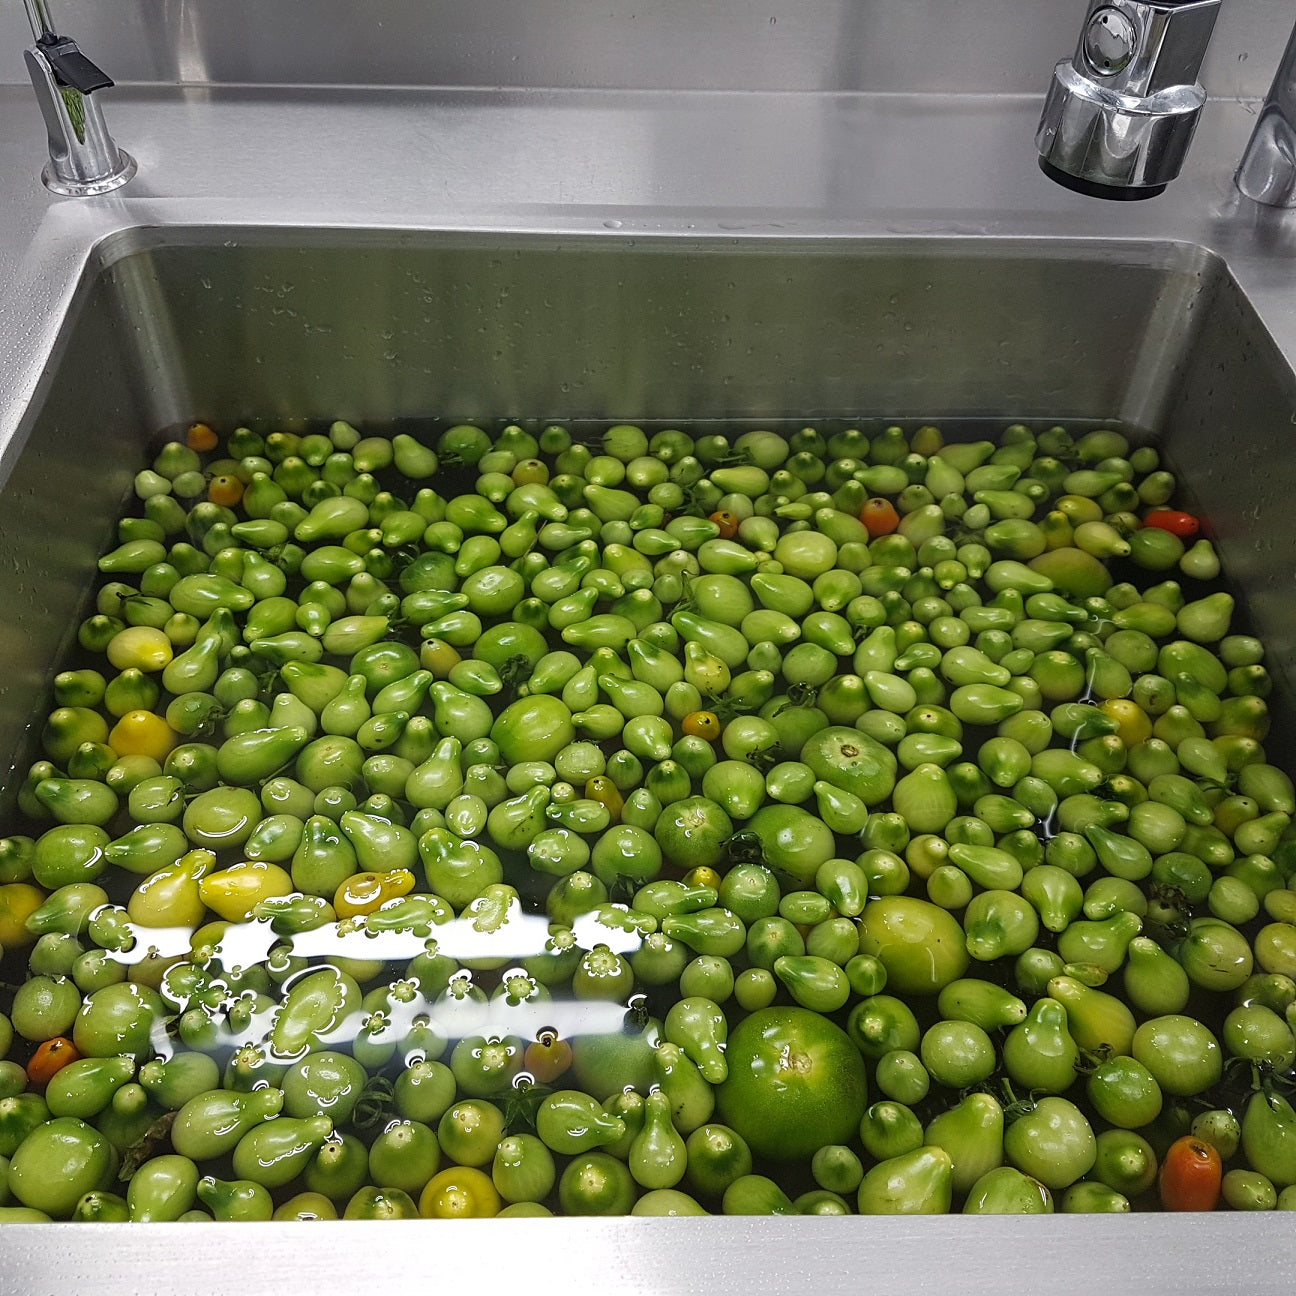 green tomatoes in sink being washed before being used to make range Tasmania green tomato and Tasmanian pepperberry pickle